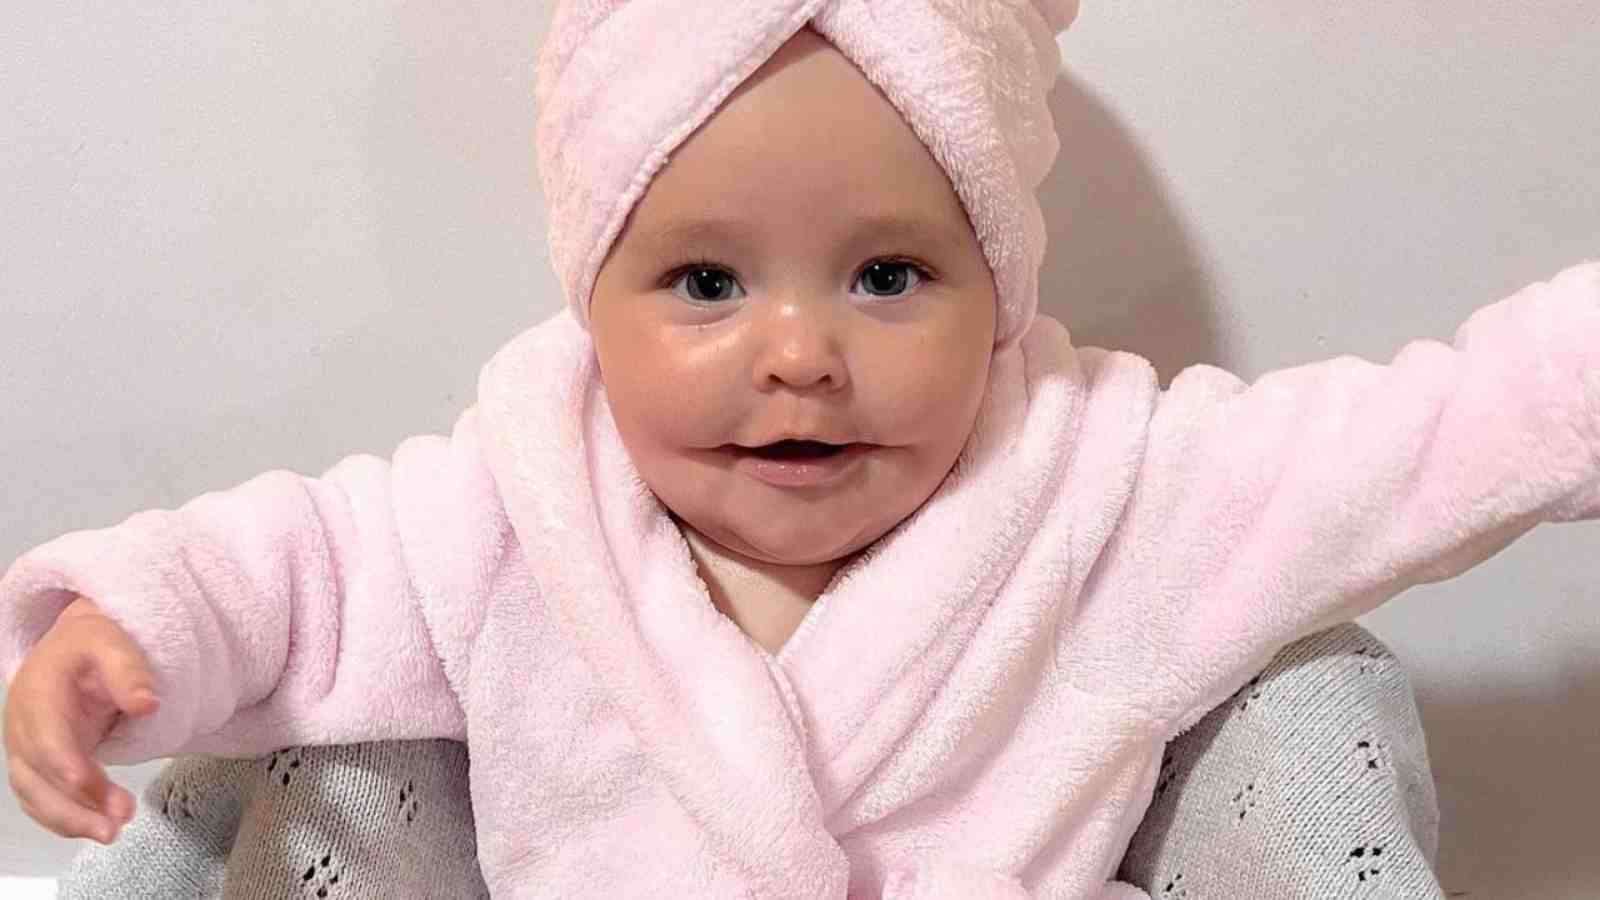 Baby Born With 'Permanent Smile' Condition Becomes Social Media Star